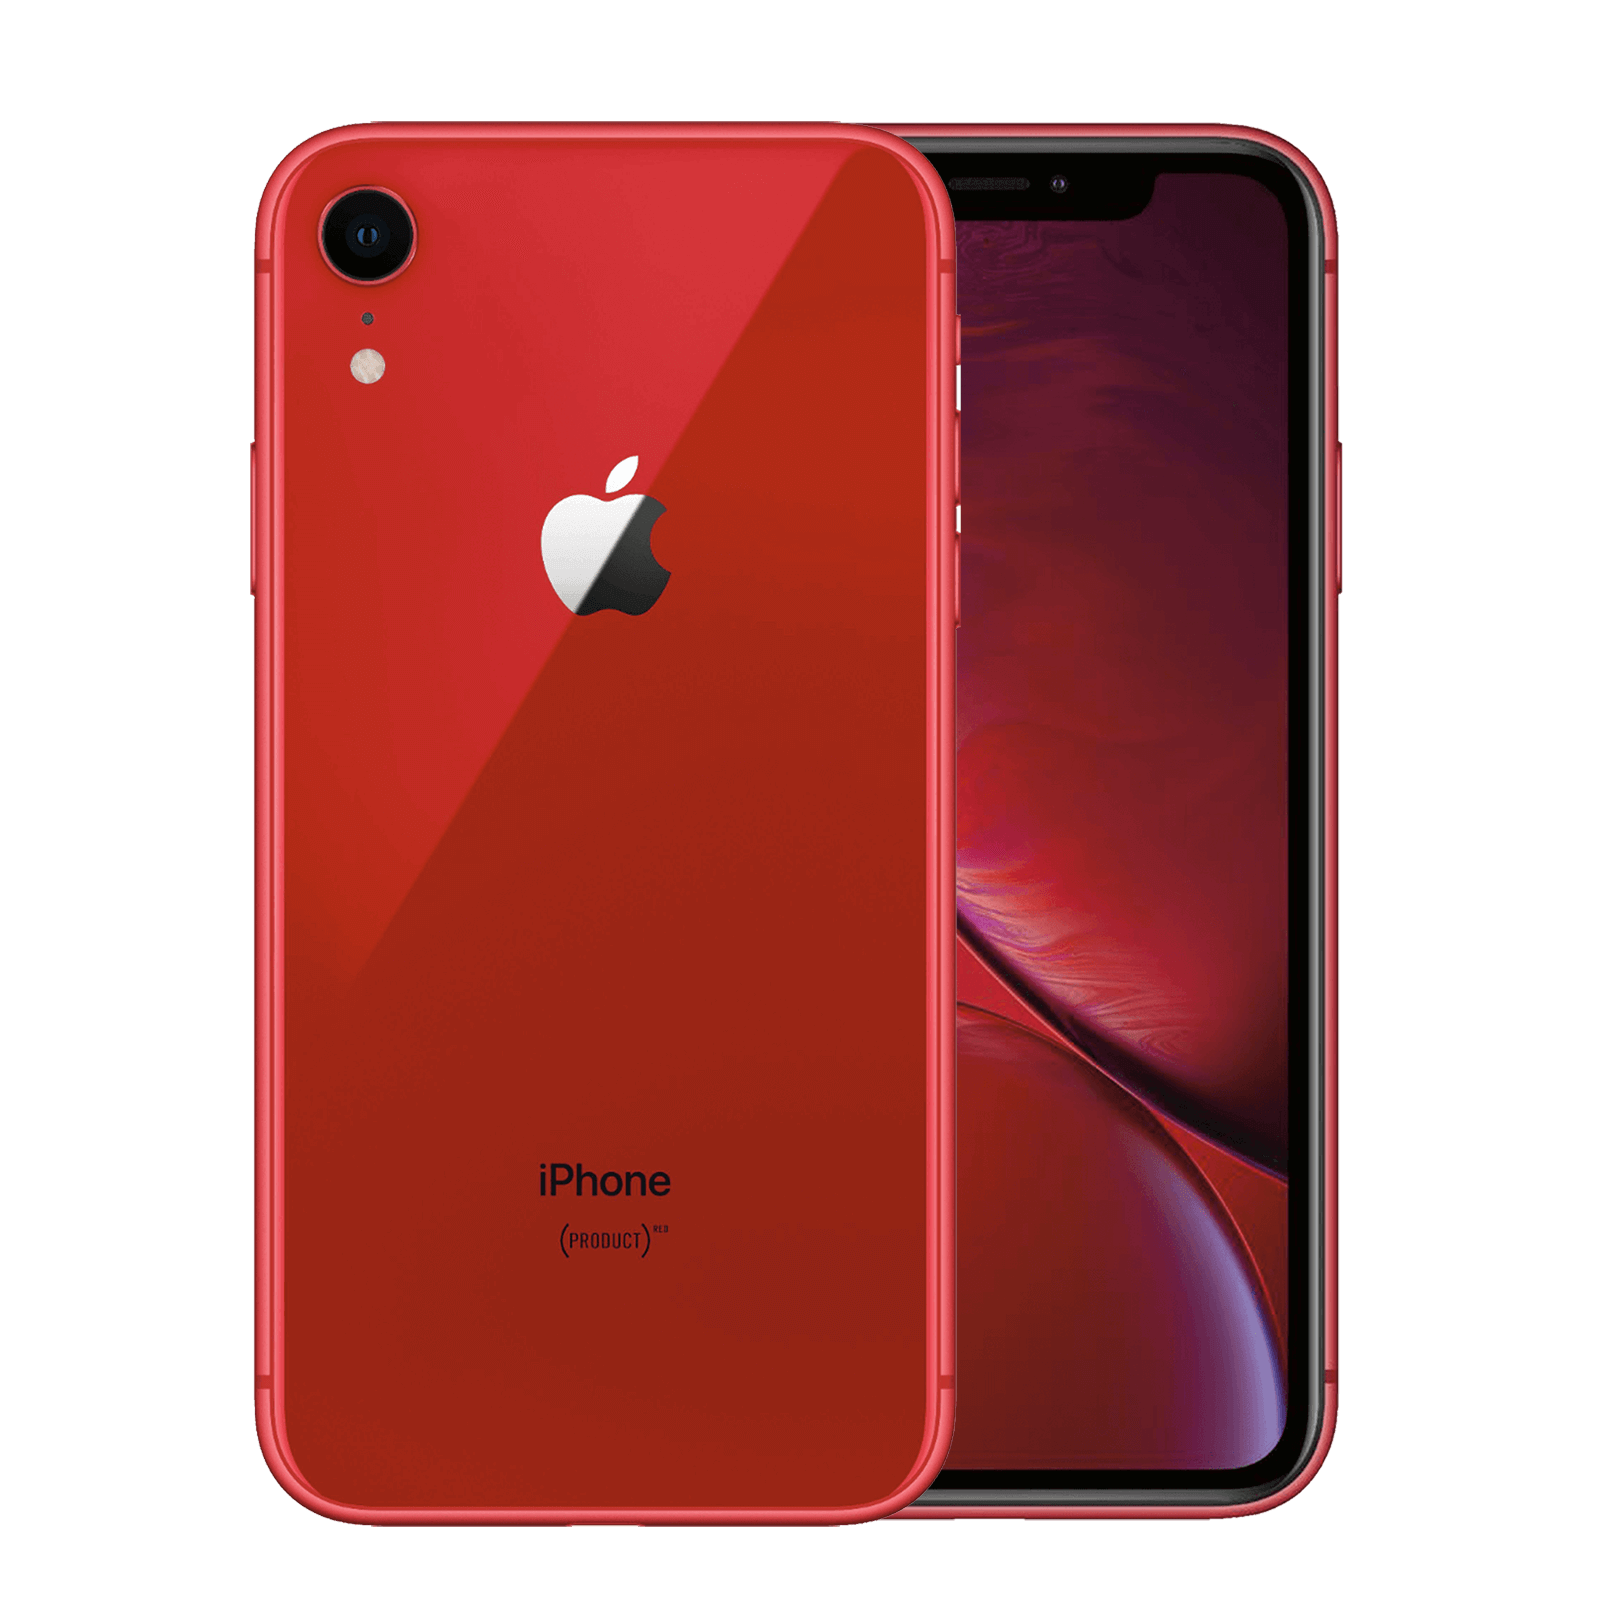 Apple iPhone XR 256GB Product Red Good - AT&T